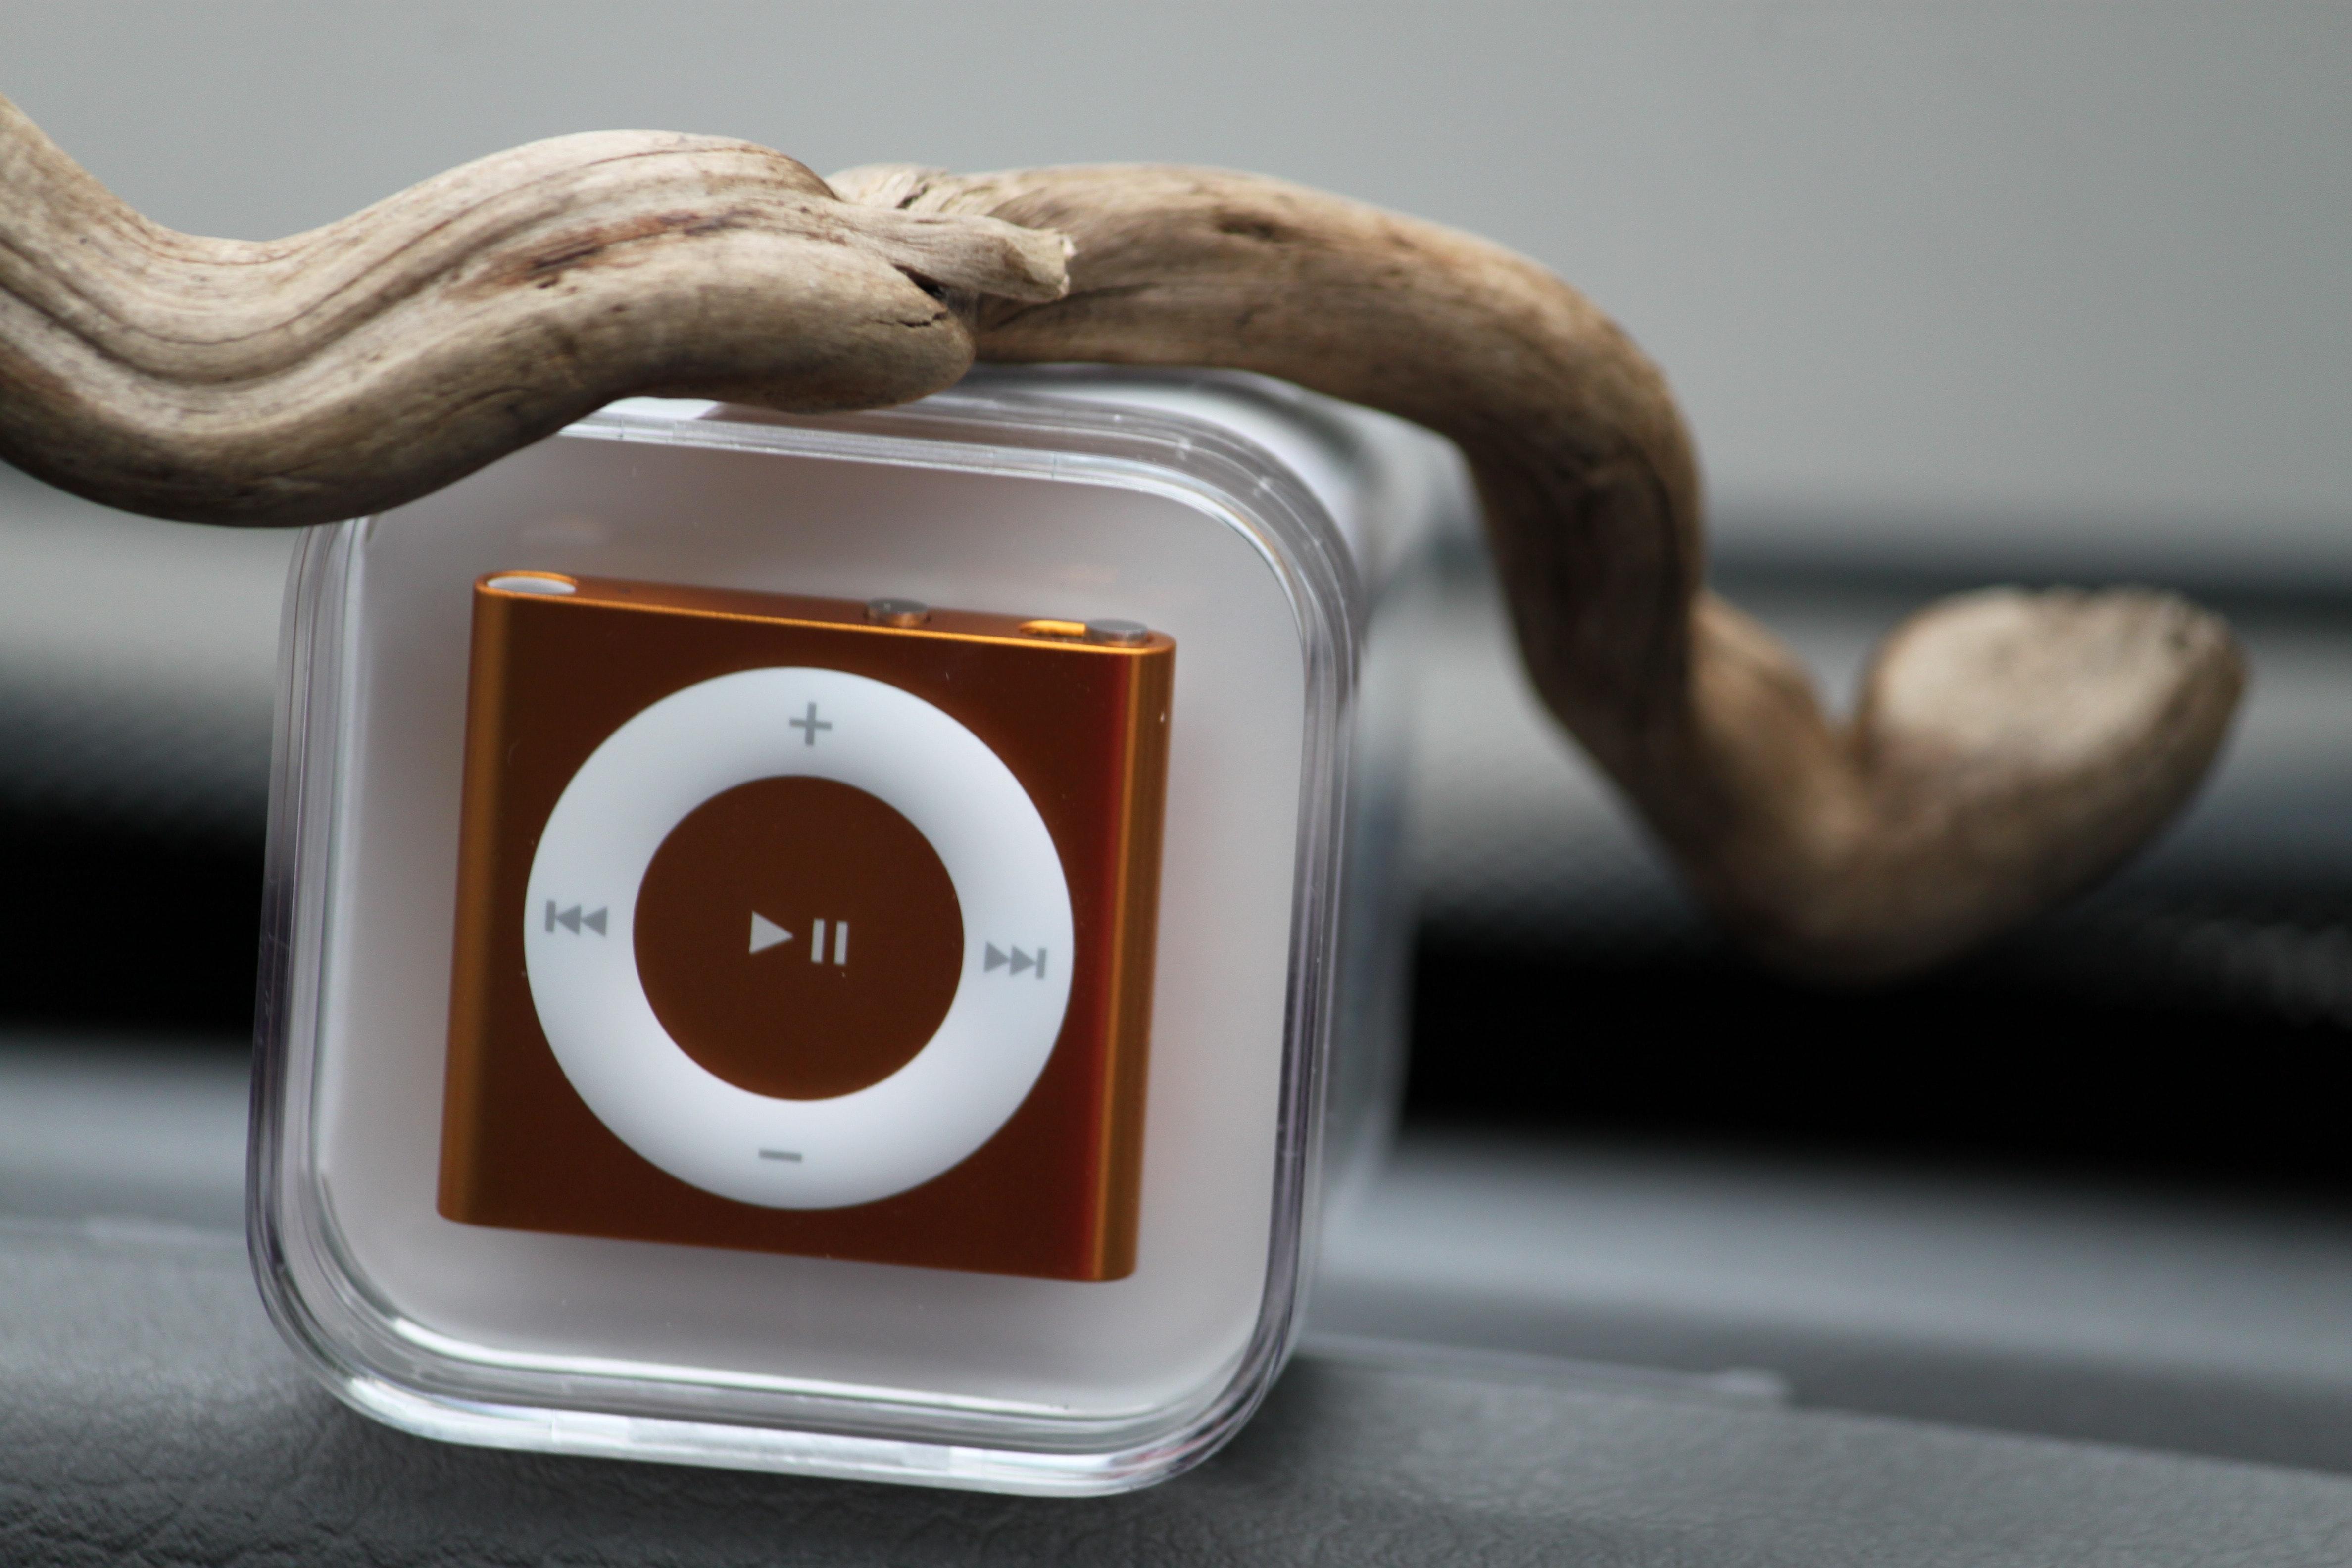 What apps can you get on iPod nano? 